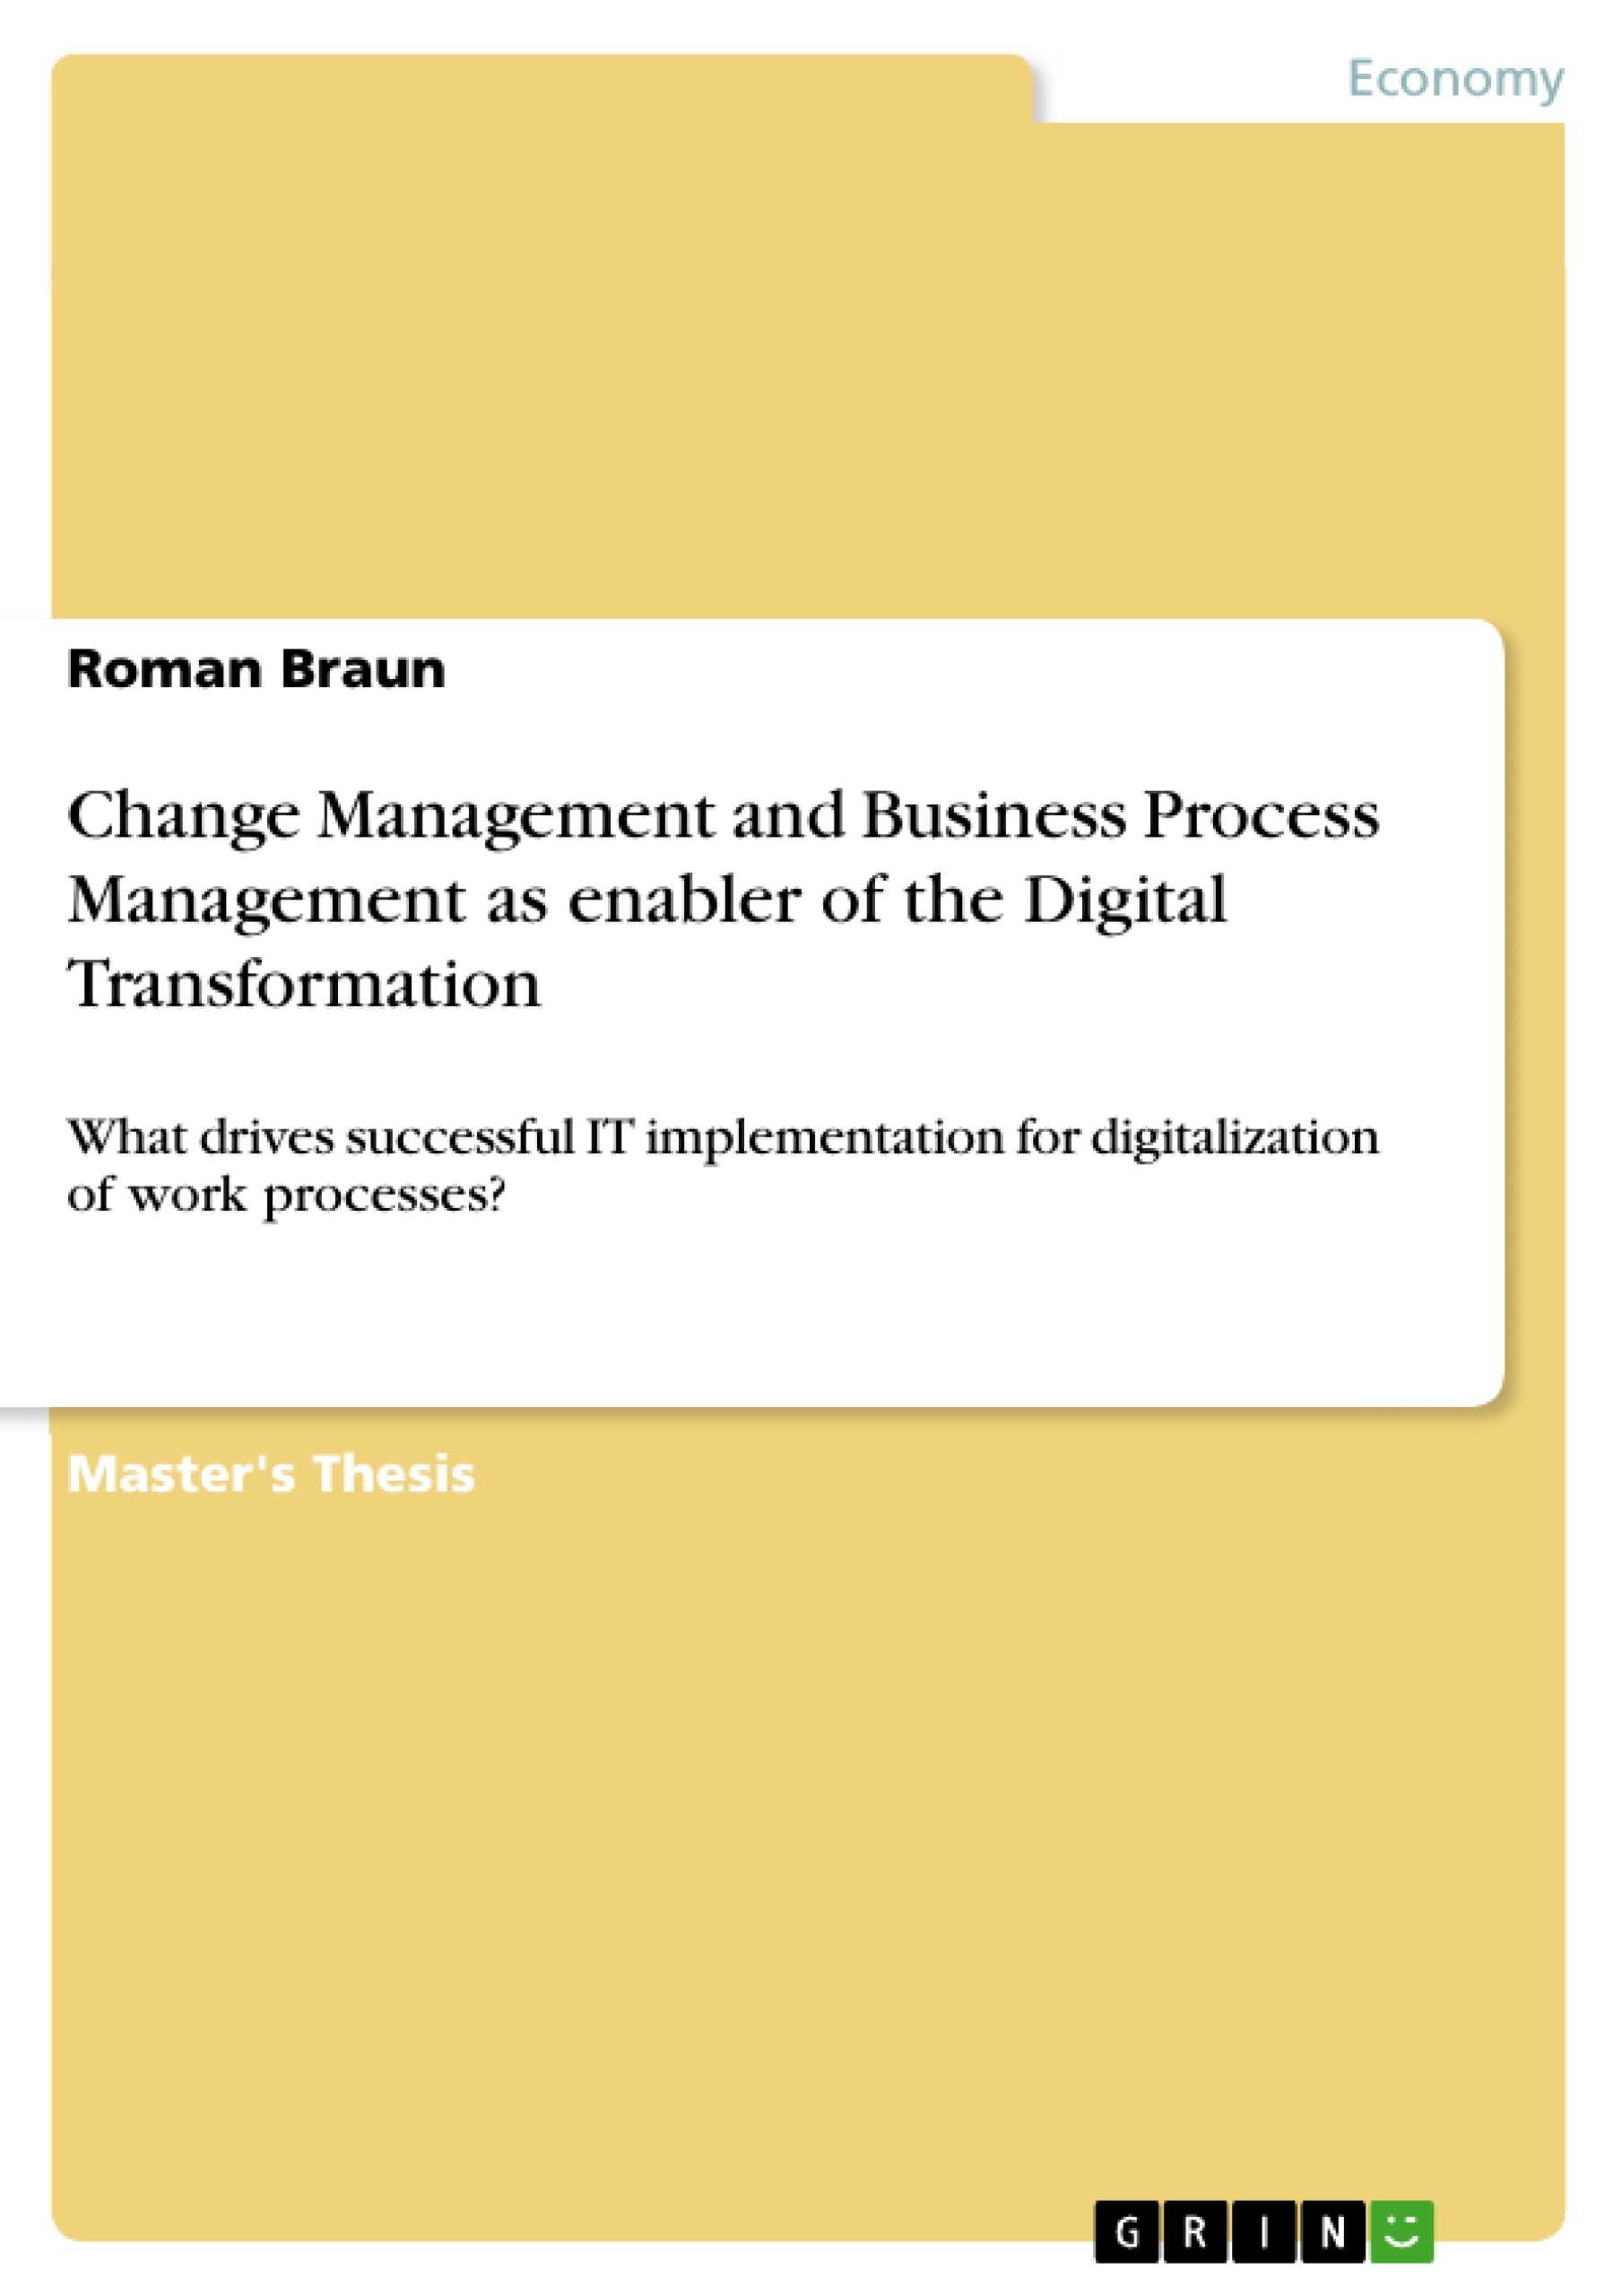 Title: Change Management and Business Process Management as enabler of the Digital Transformation